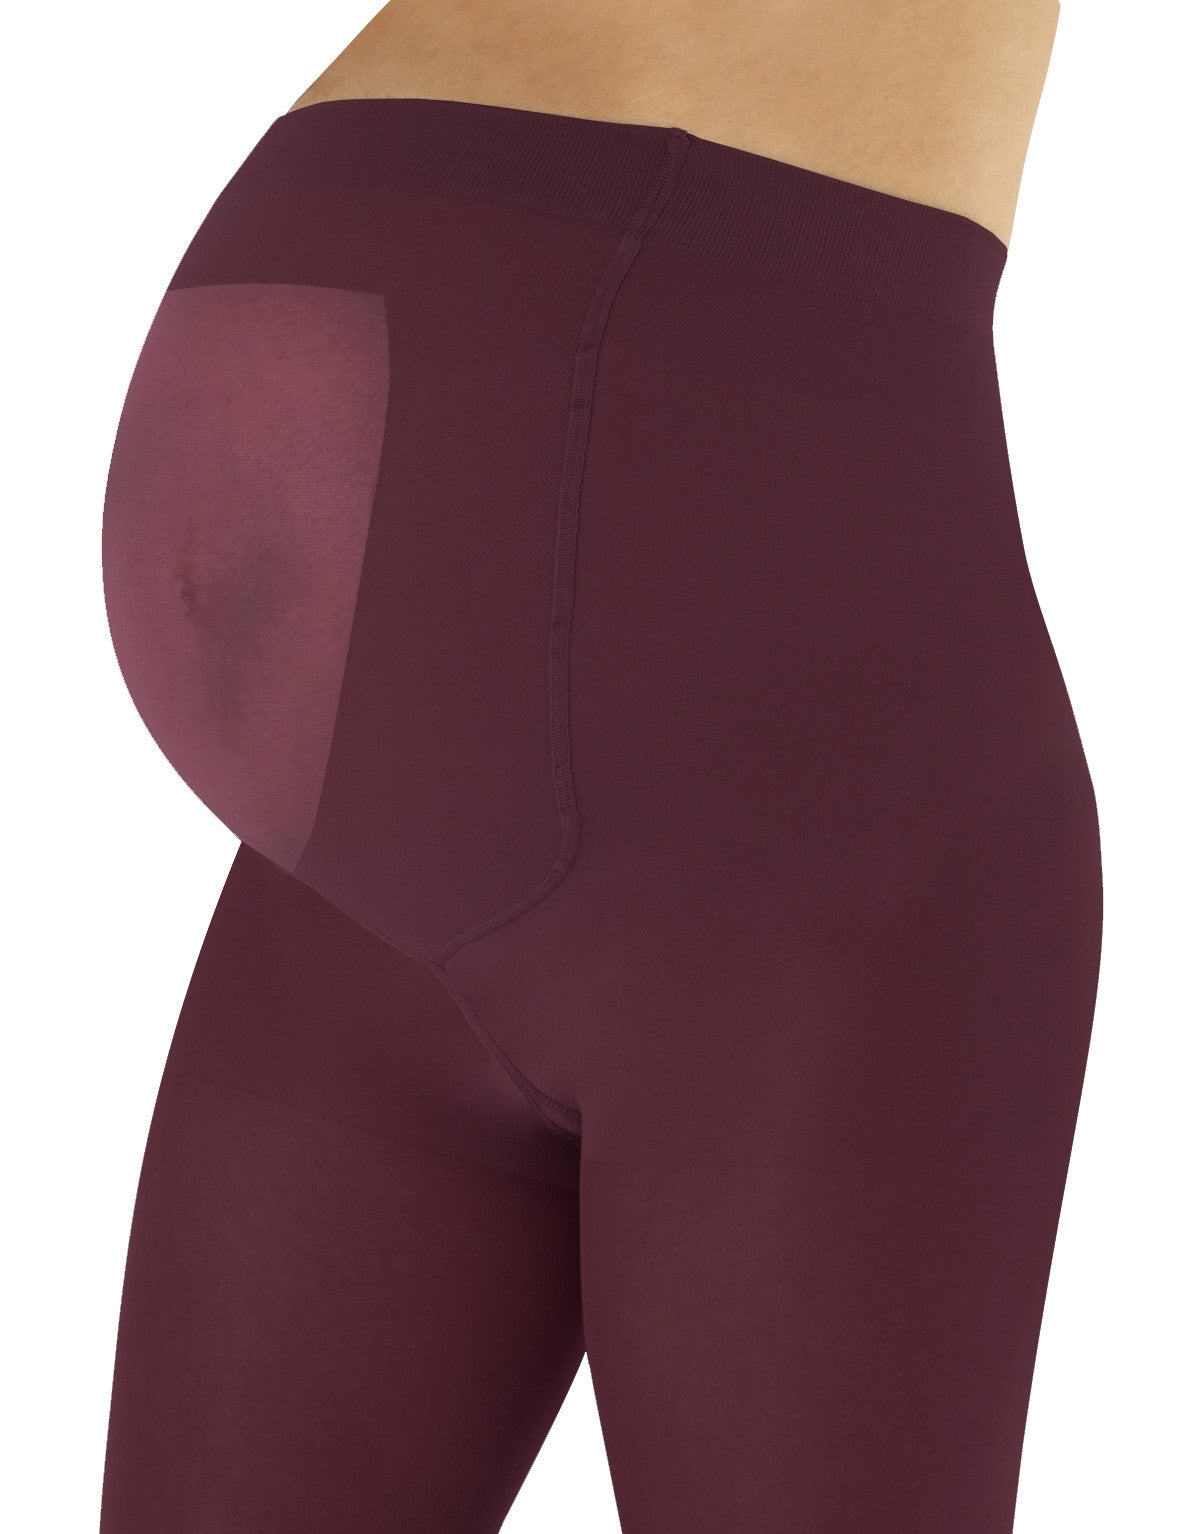 Calzitaly 100 Den Maternity Tights - Wine ultra opaque pregnancy tights with an extra panel and flat seam.